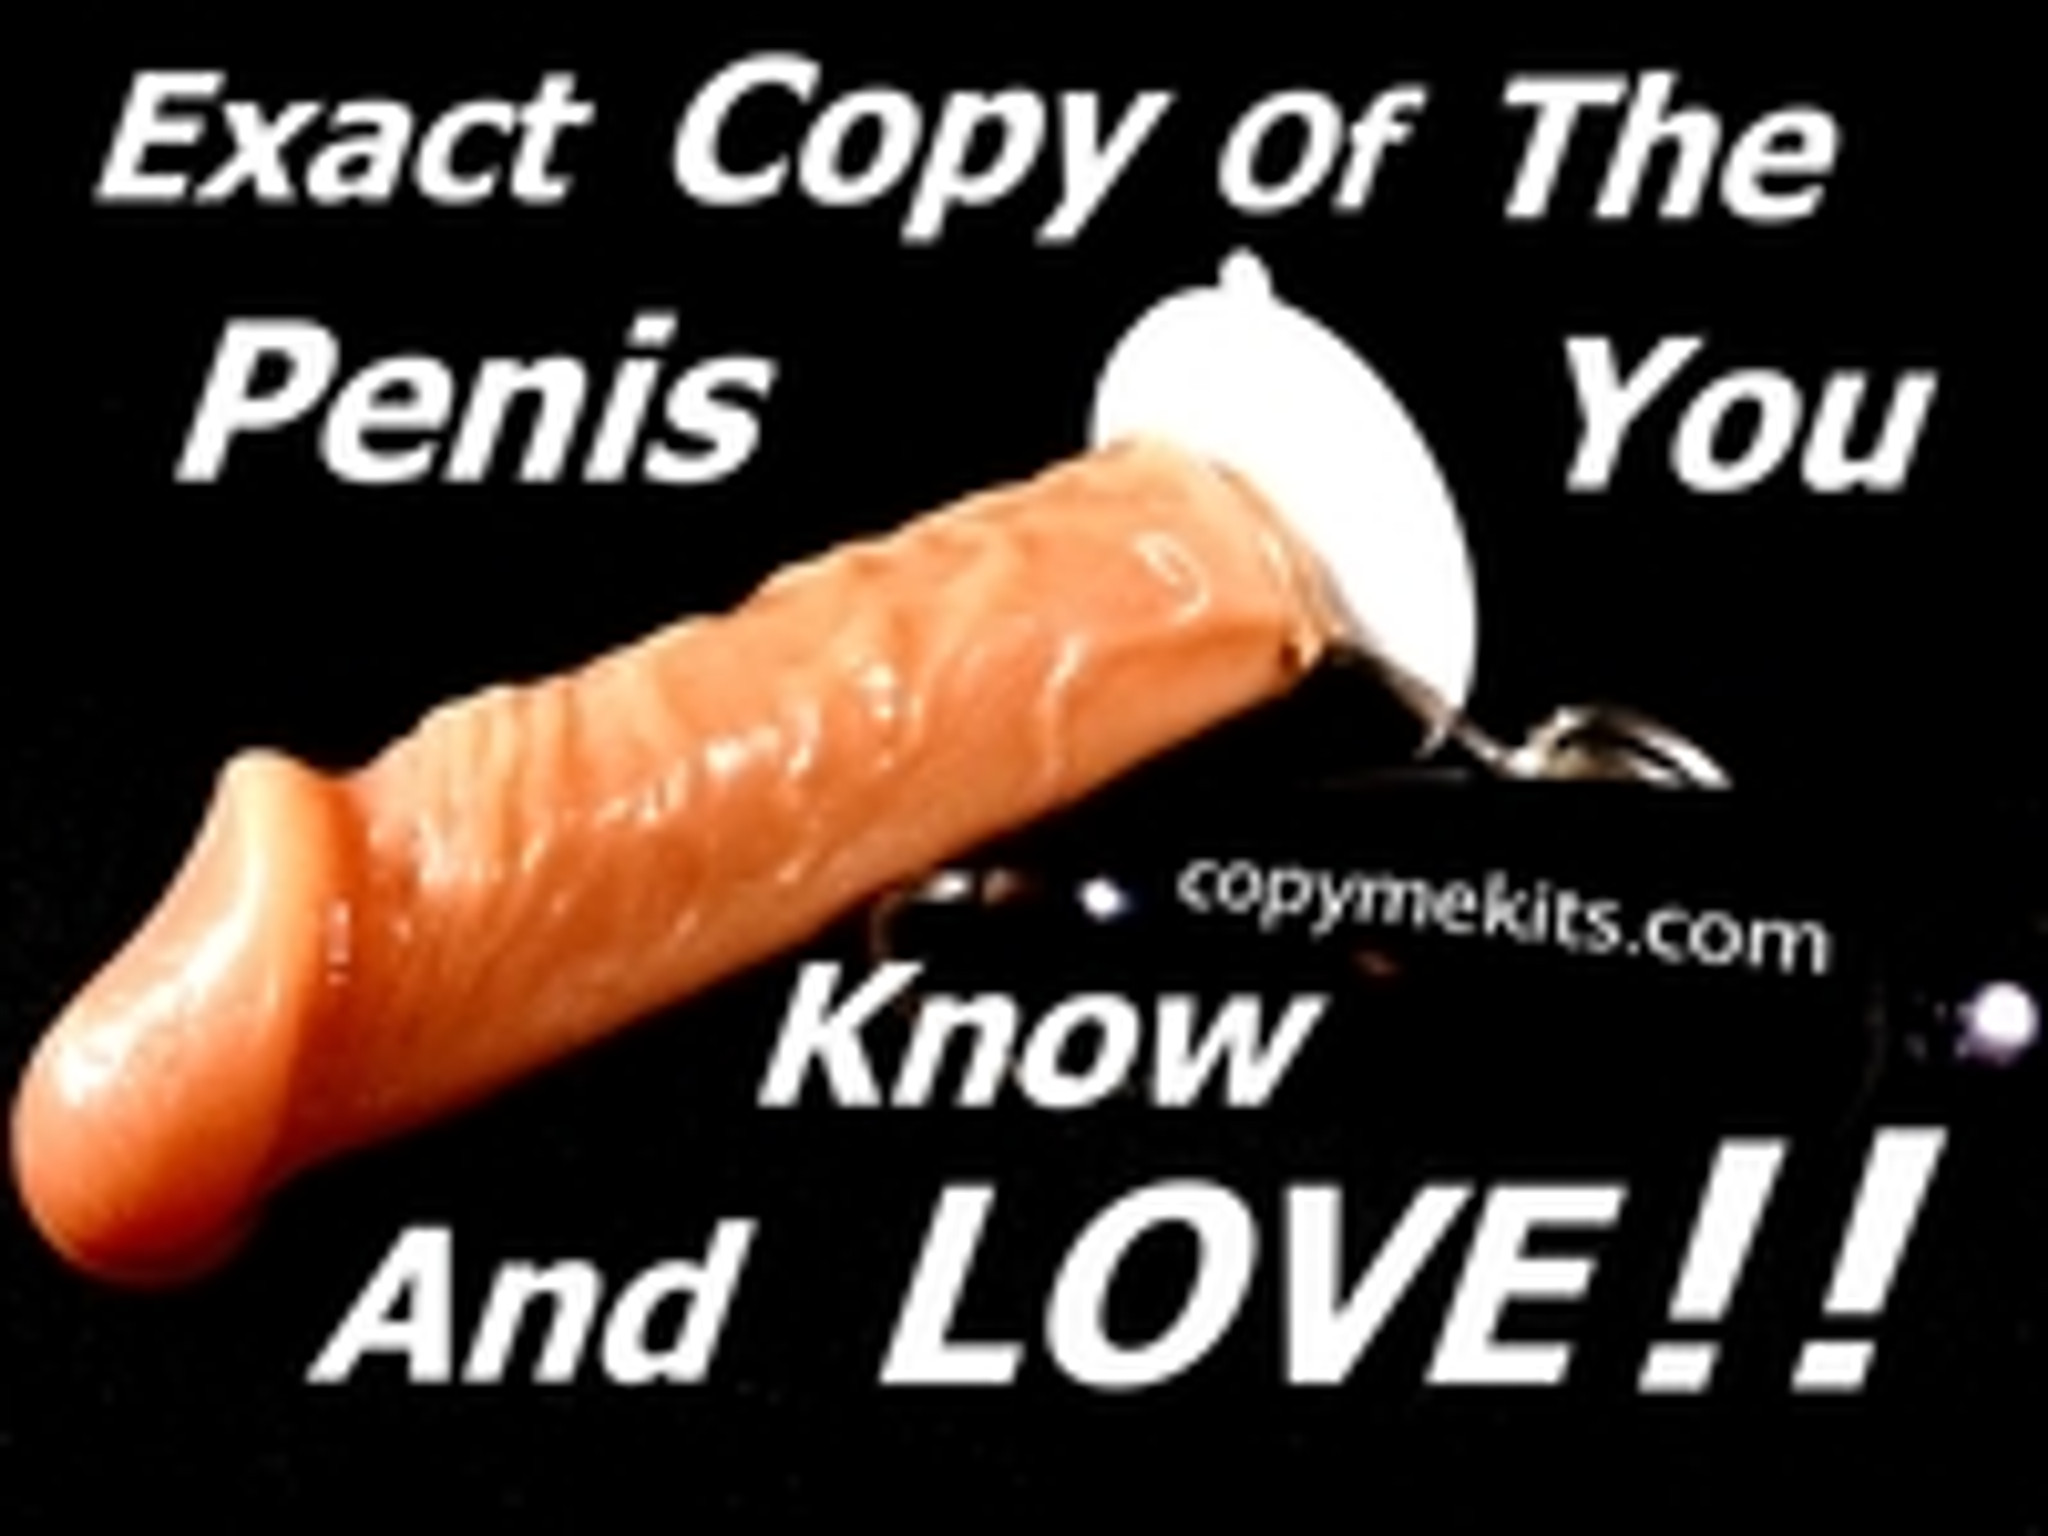 Penis Kit, Penis Casting, Penis Copy, Find The One That Is Right For You